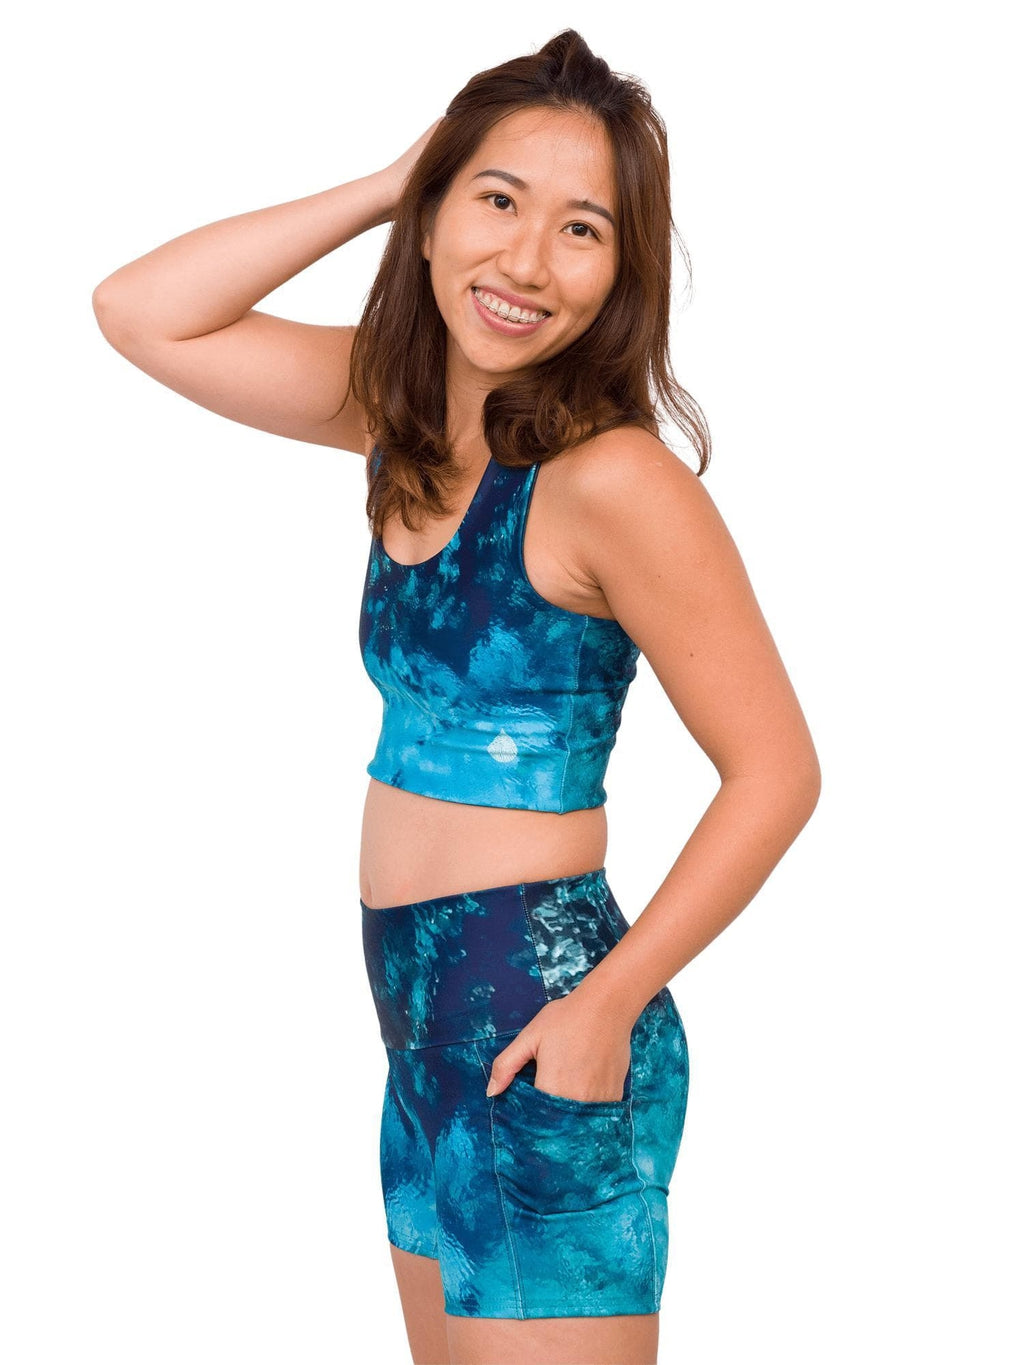 Model: Laura is a hurricane researcher and avid scuba diver. She is 5&#39;3&quot;, 120lbs, 34B and is wearing a S short and S top.